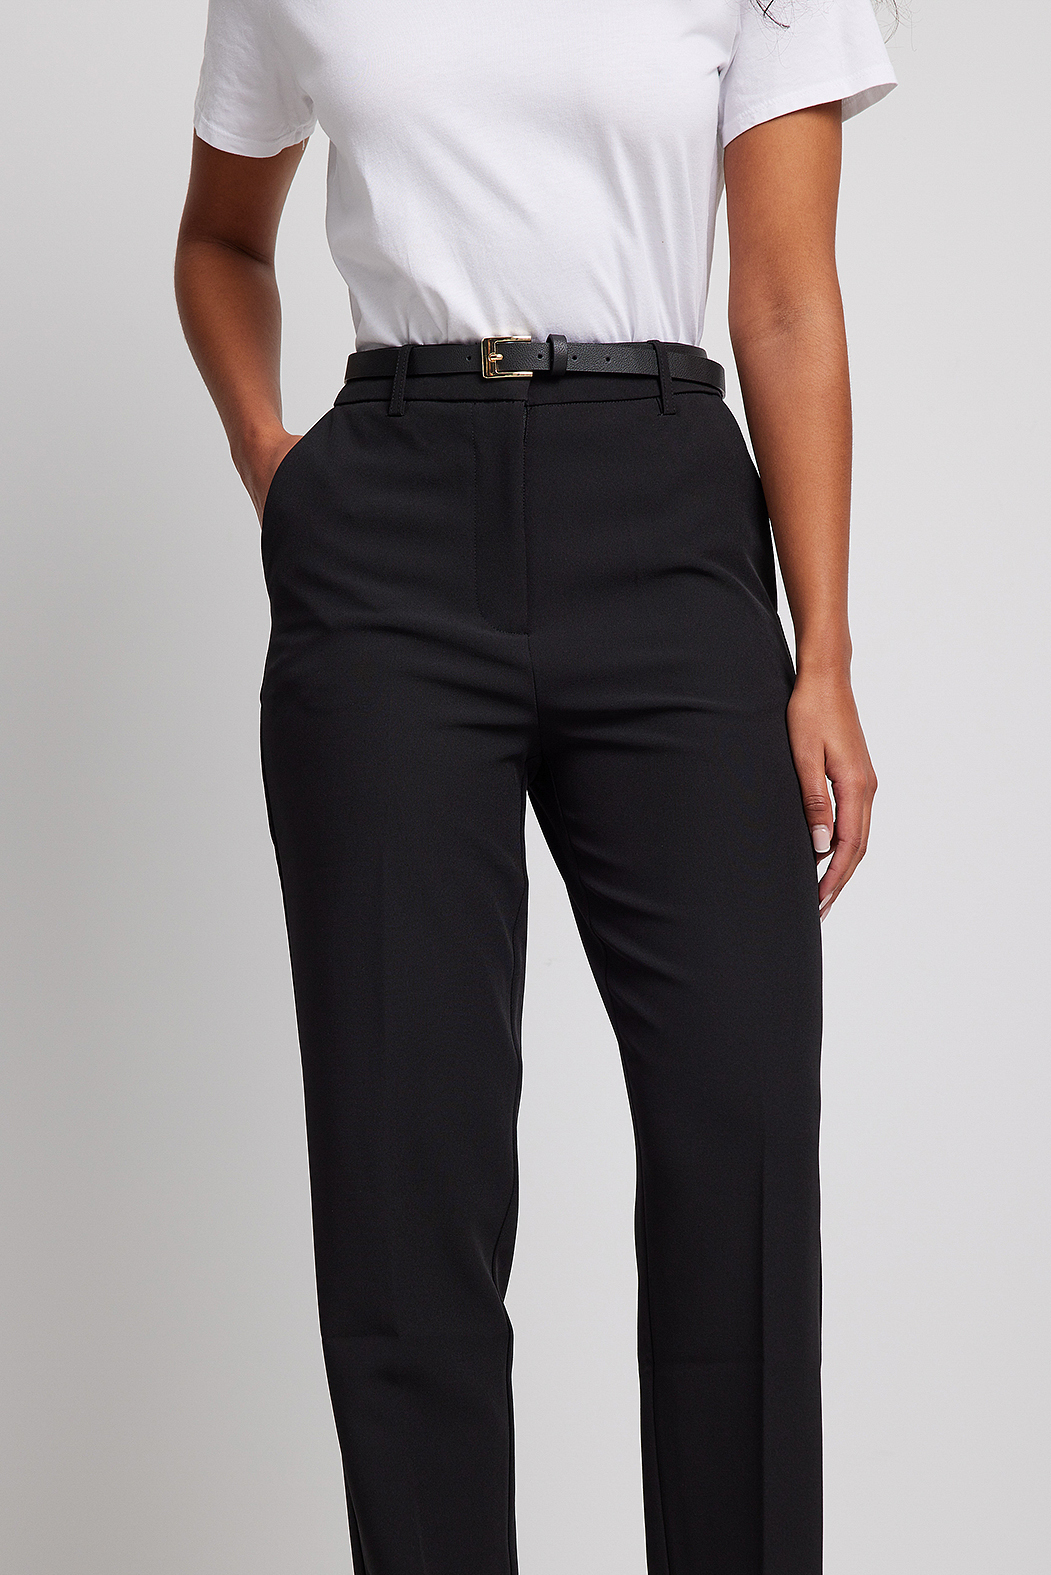 NA-KD Classic Cropped Regular Suit Pants - Black